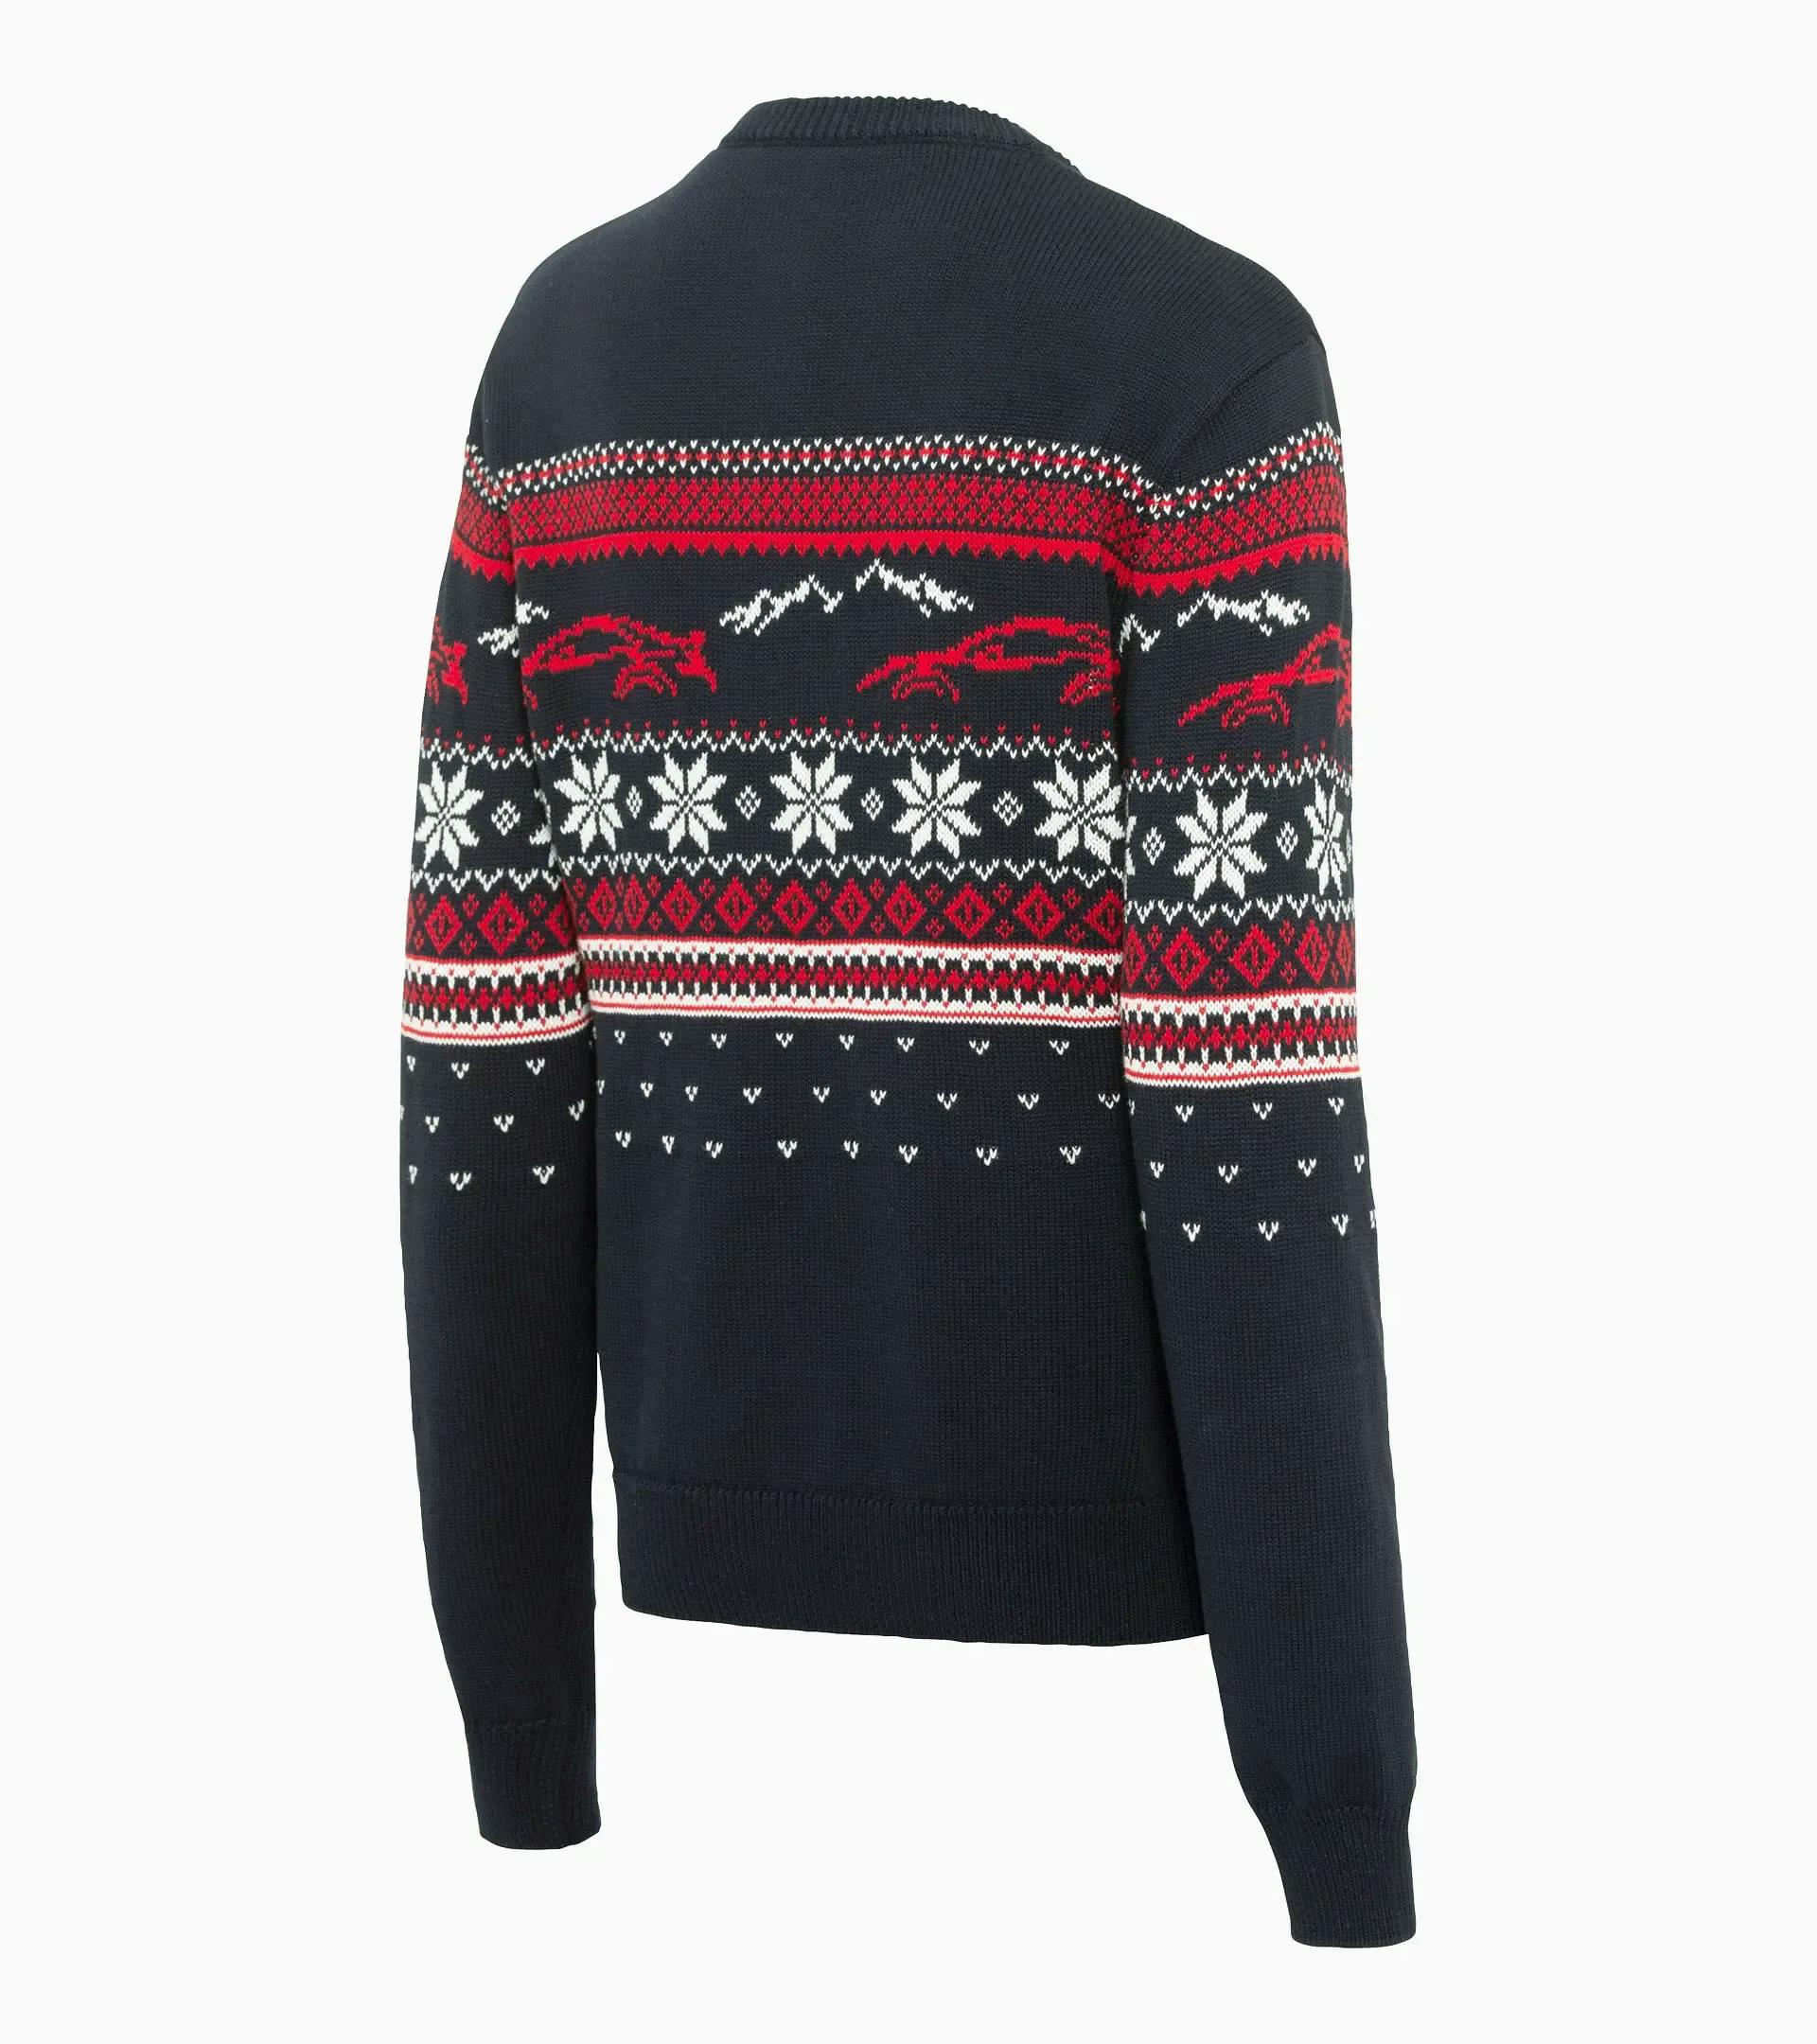 Unisex knitted pullover – Christmas 2